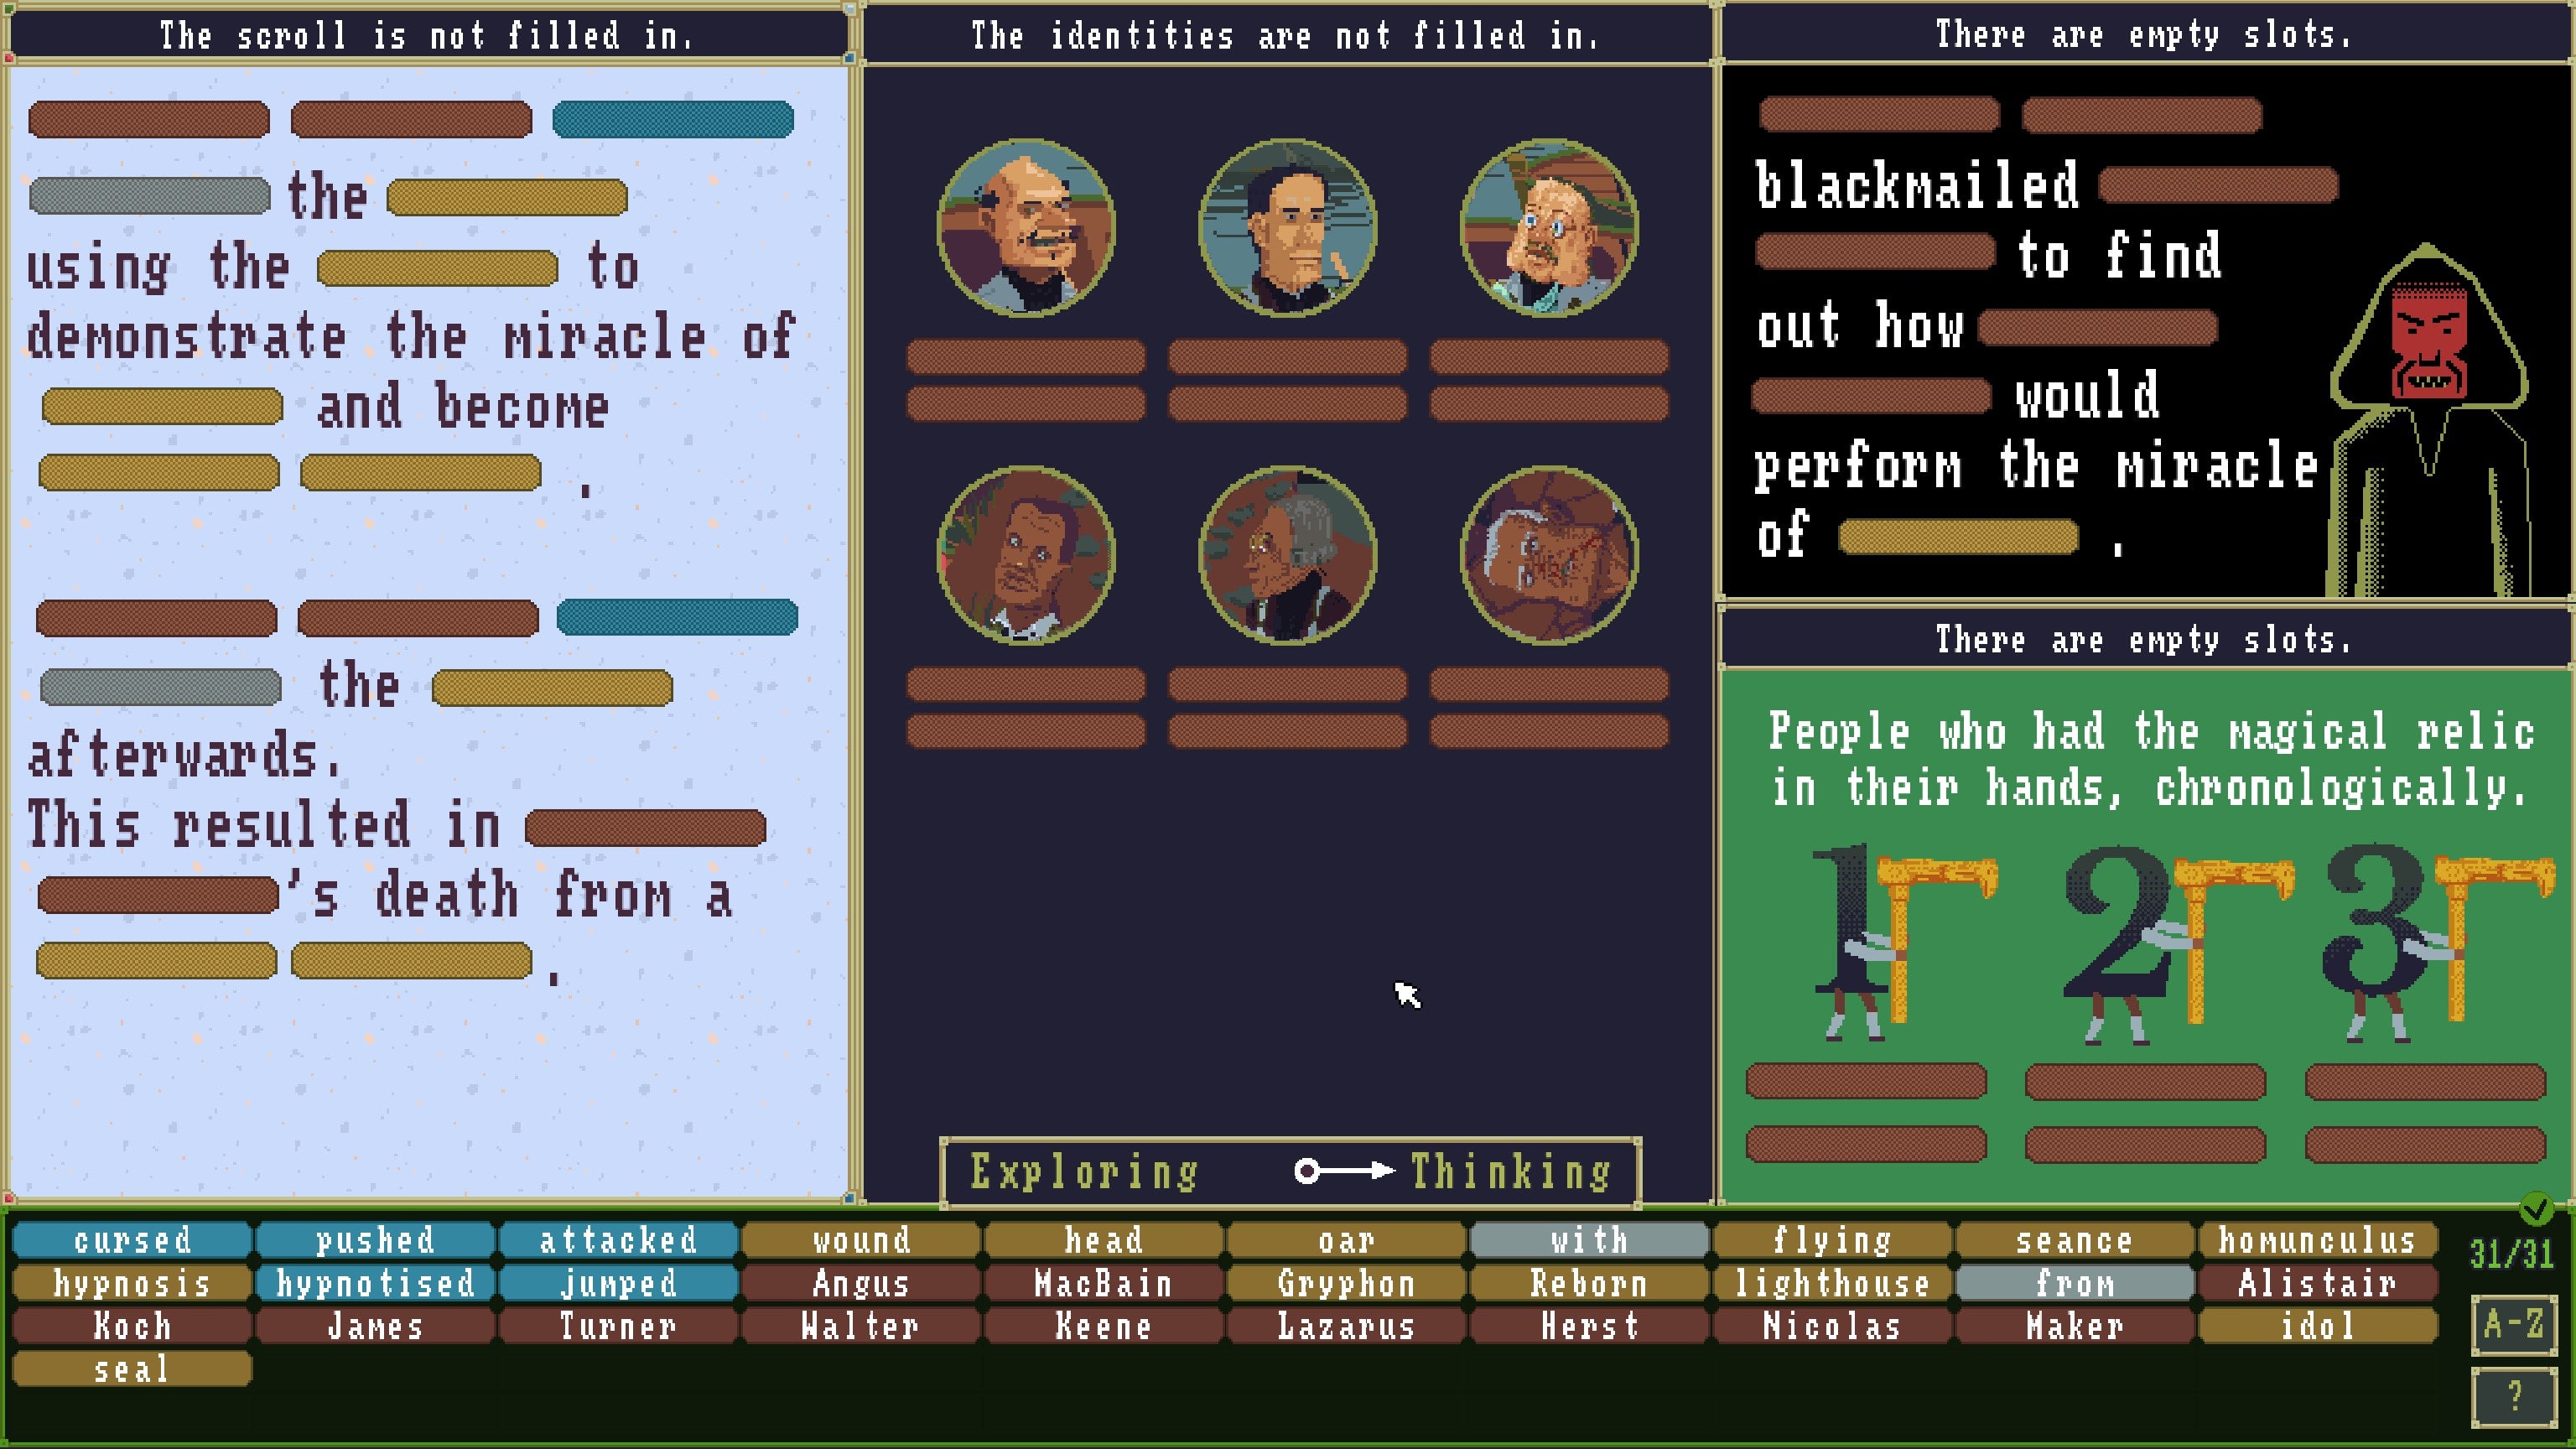 The screen is divided into four segments with text, character portraits and two additional text-based puzzles to be filled in by the player in The Case Of The Golden Idol